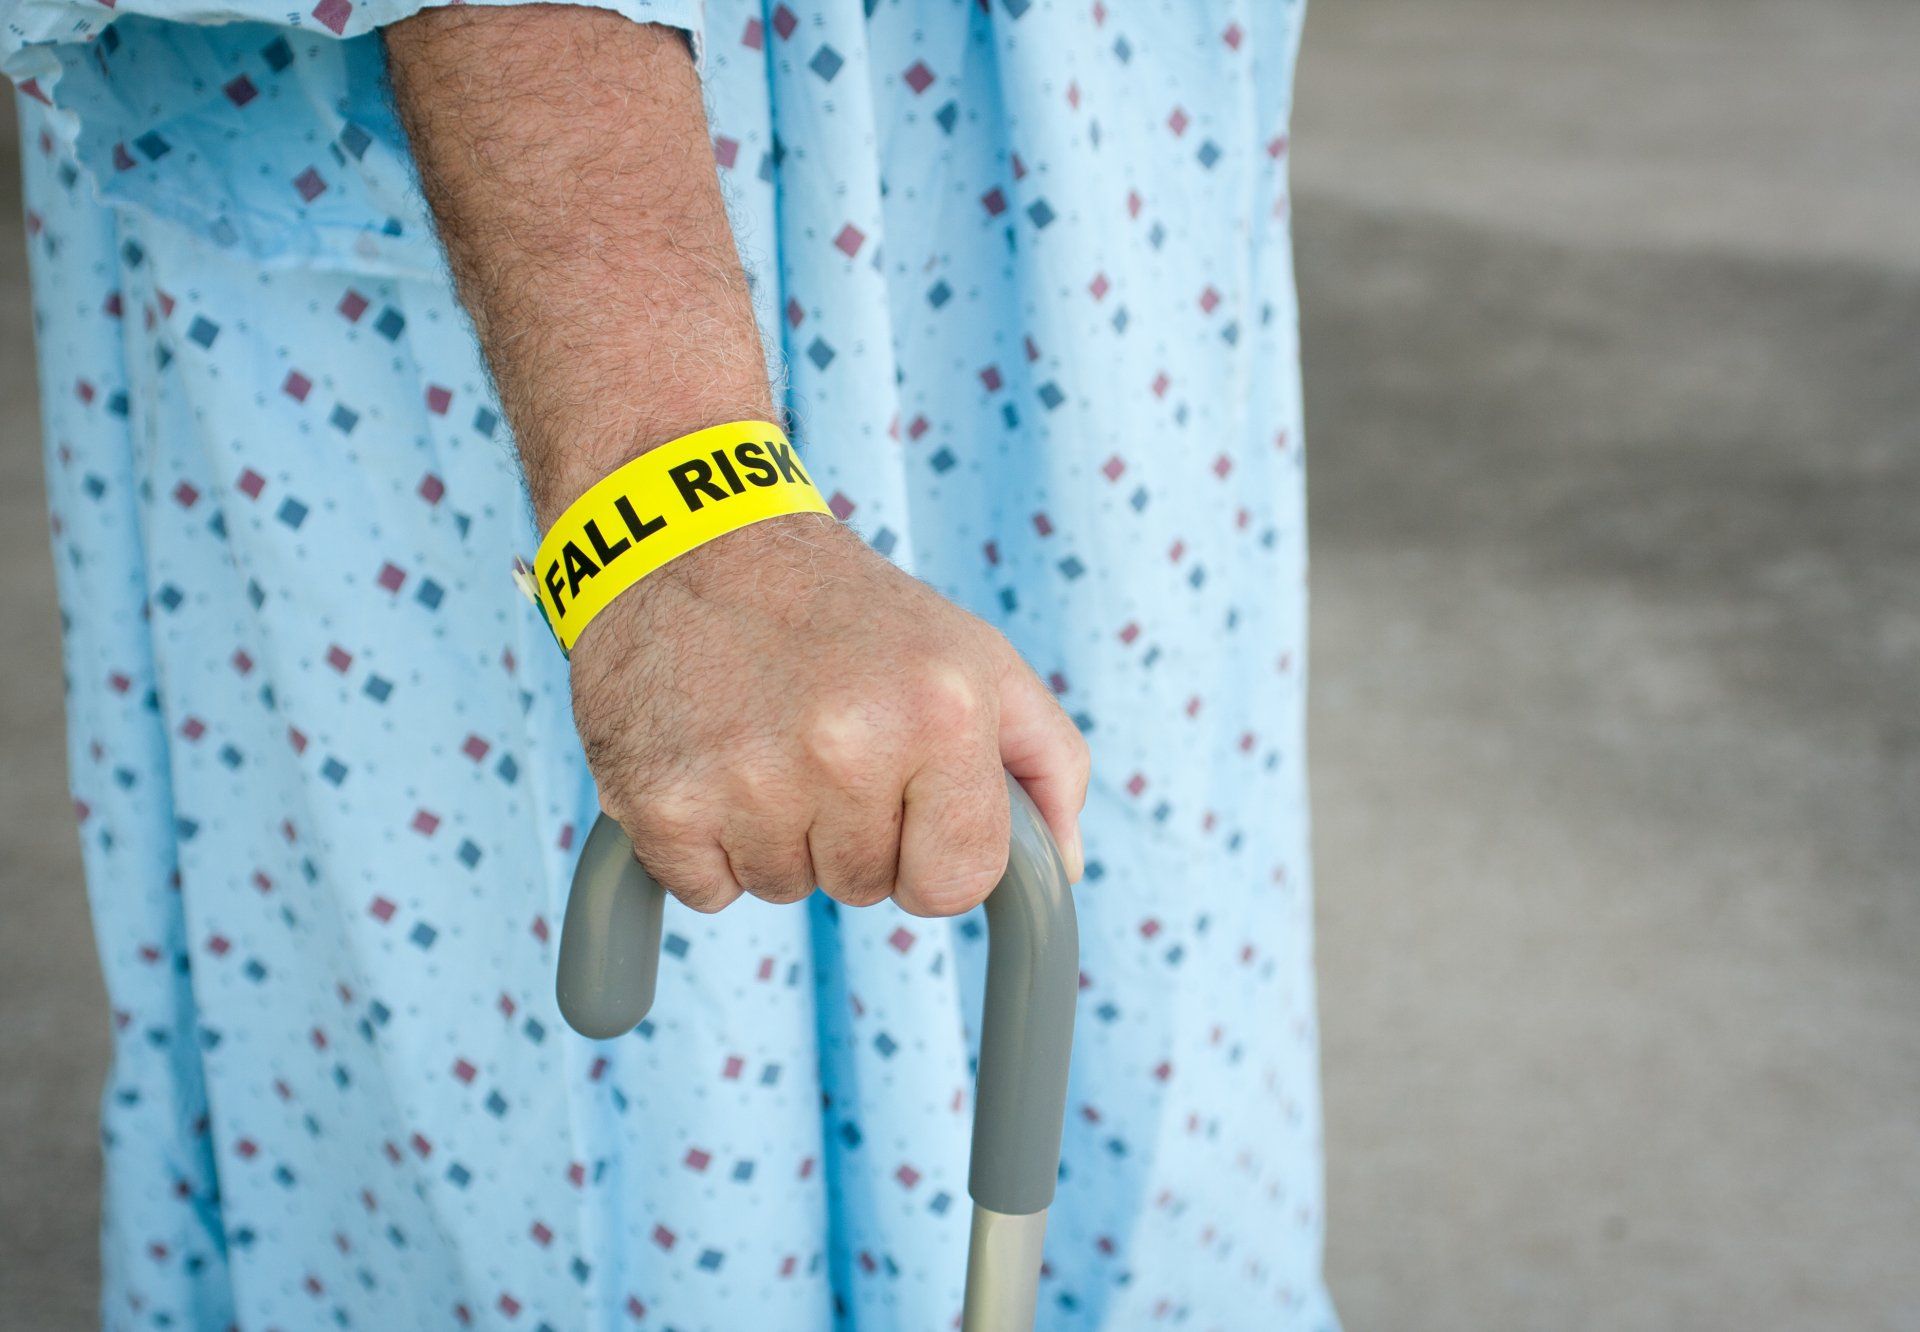 Seniors are at risk for falls, and falling is likely to cause serious injury or death